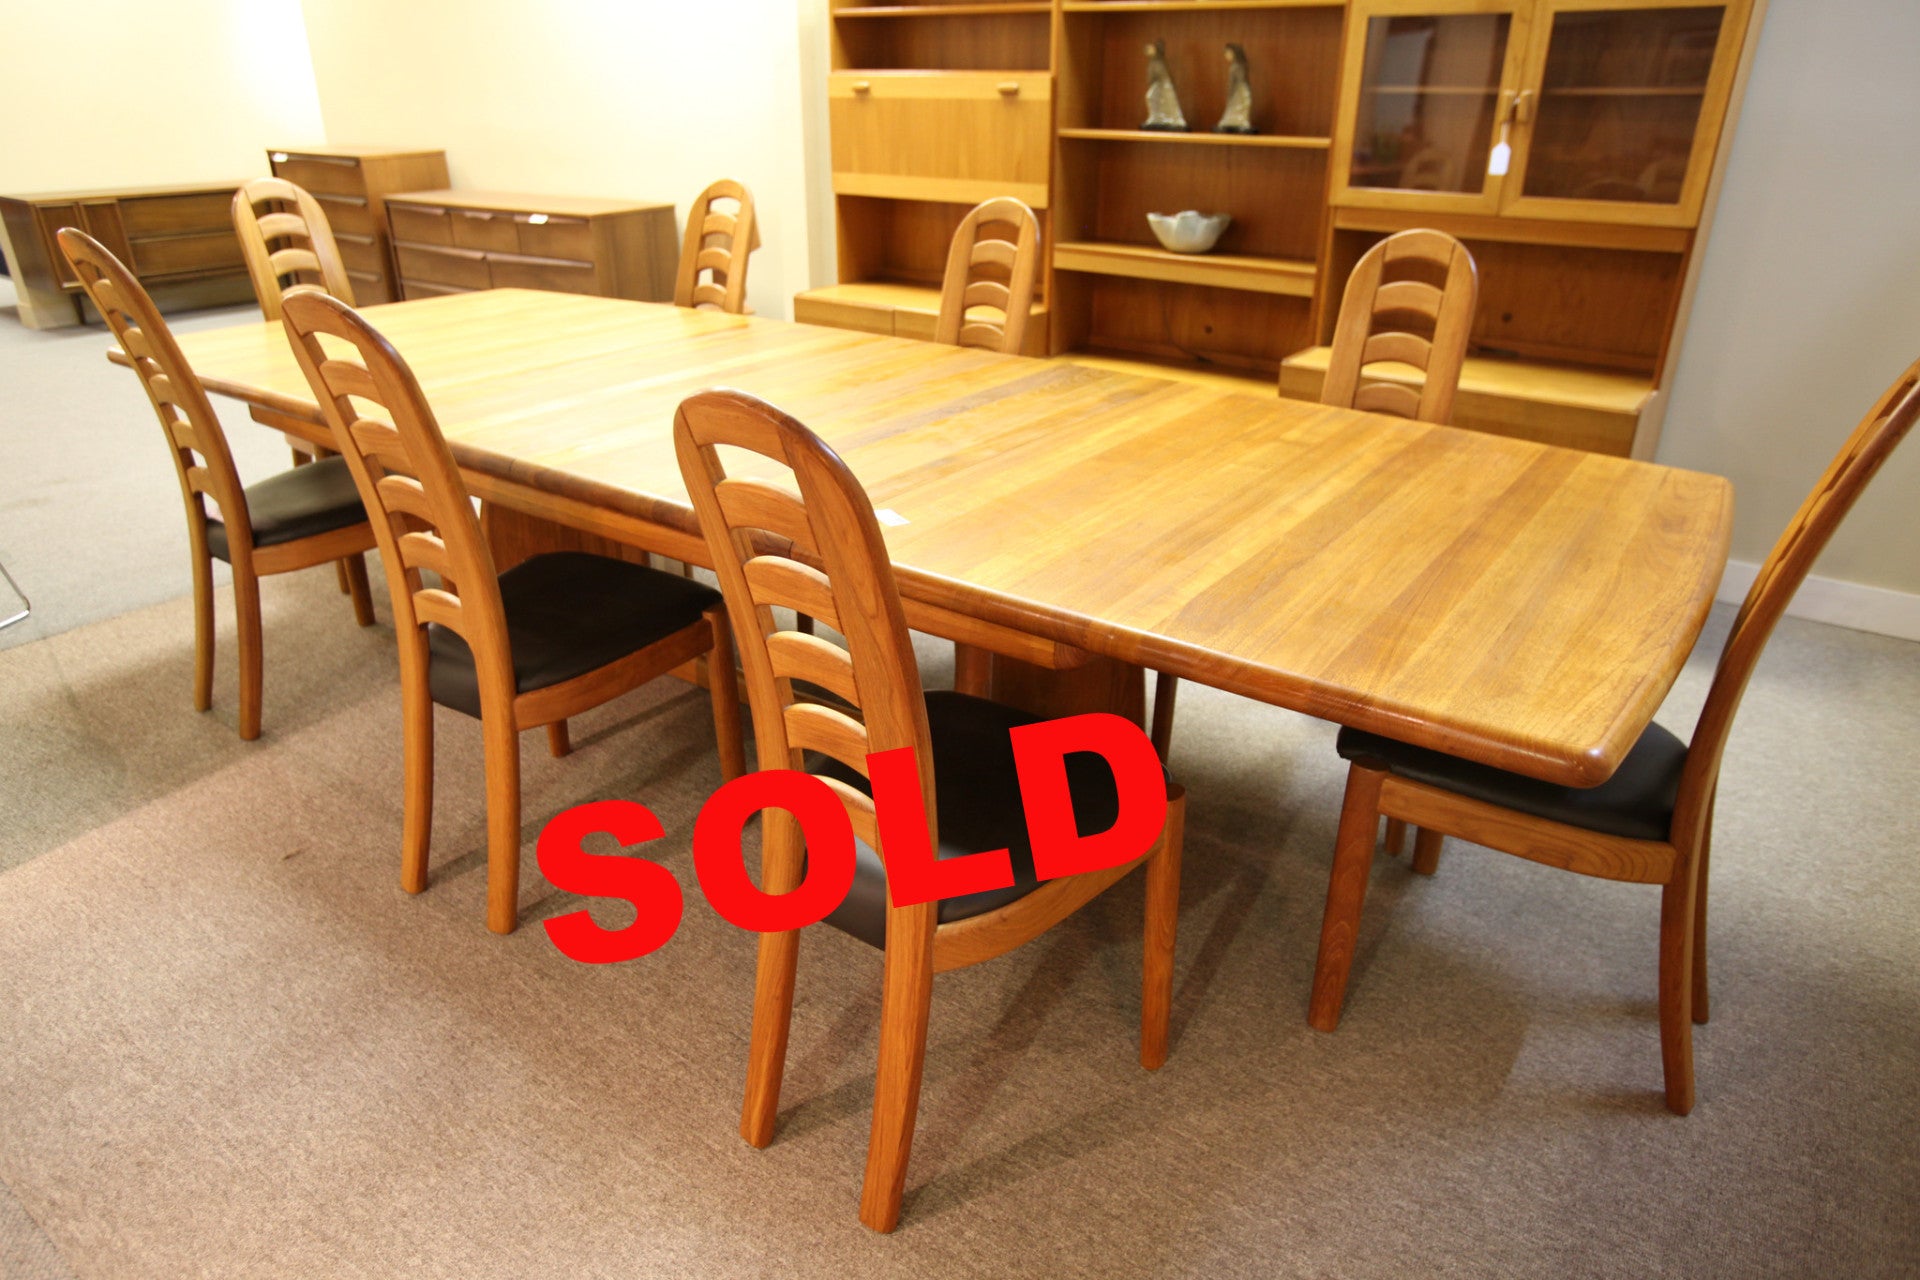 Scandia Teak Dining Table and 8 Chairs (2 leafs) 130"Lx47"W